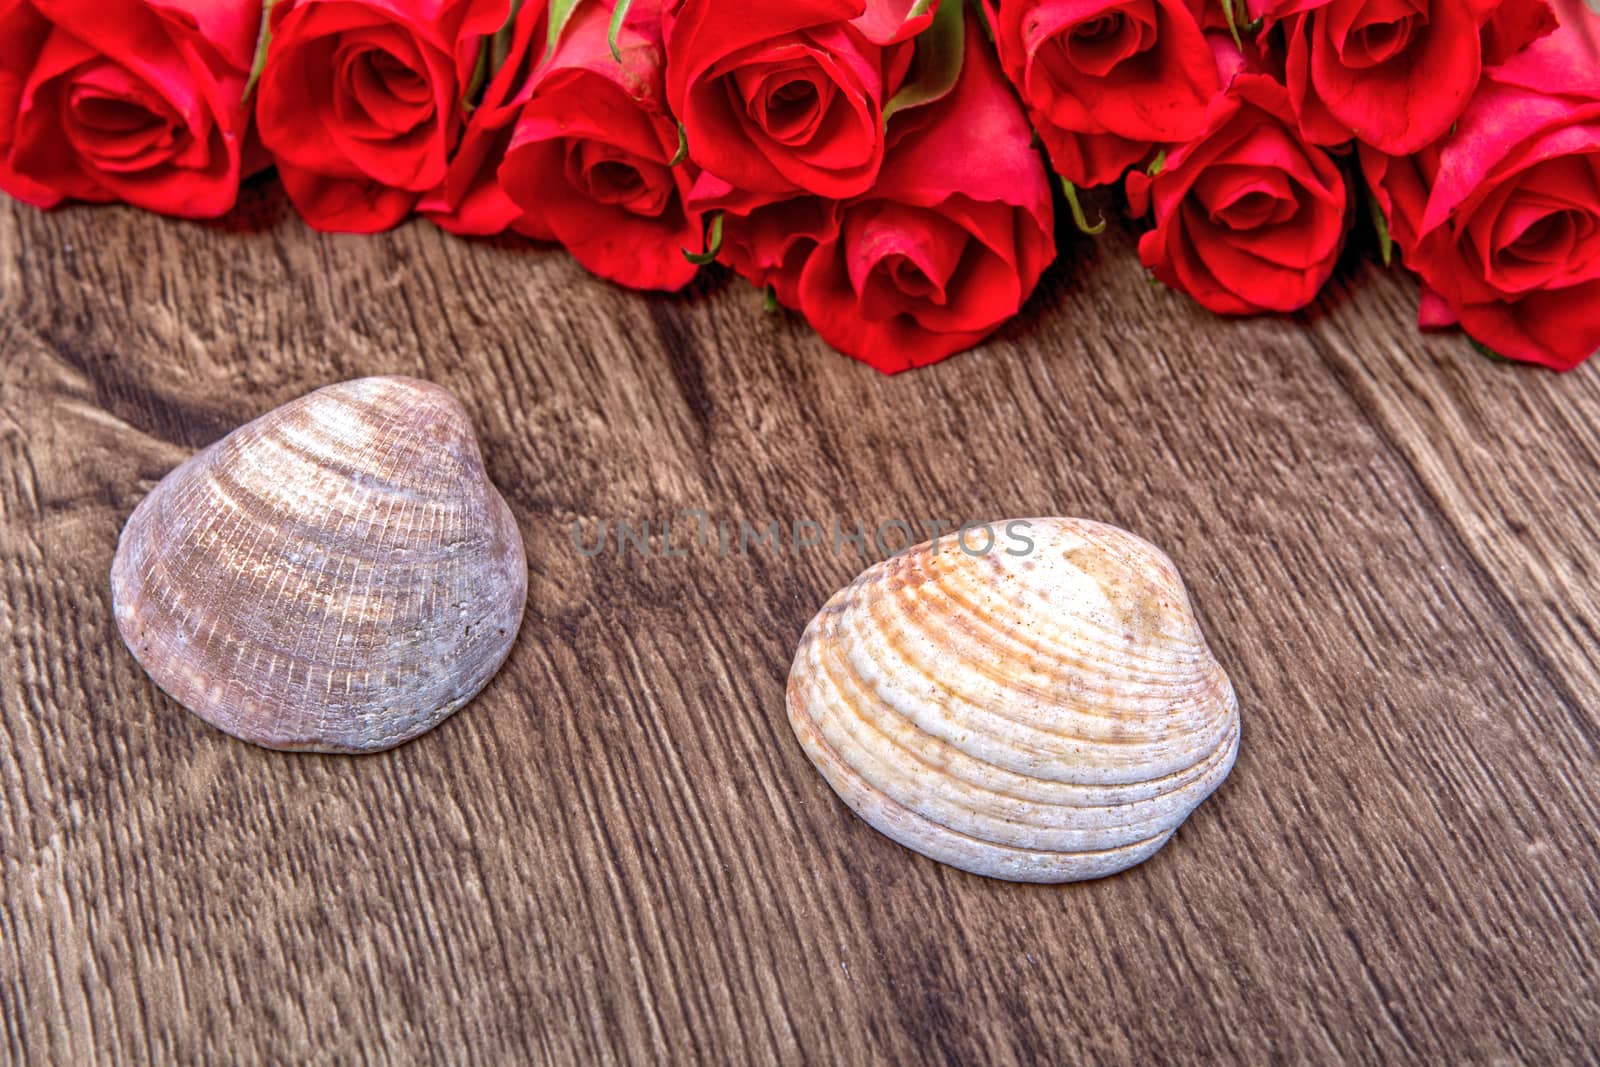 Two shells and red roses on wooden background